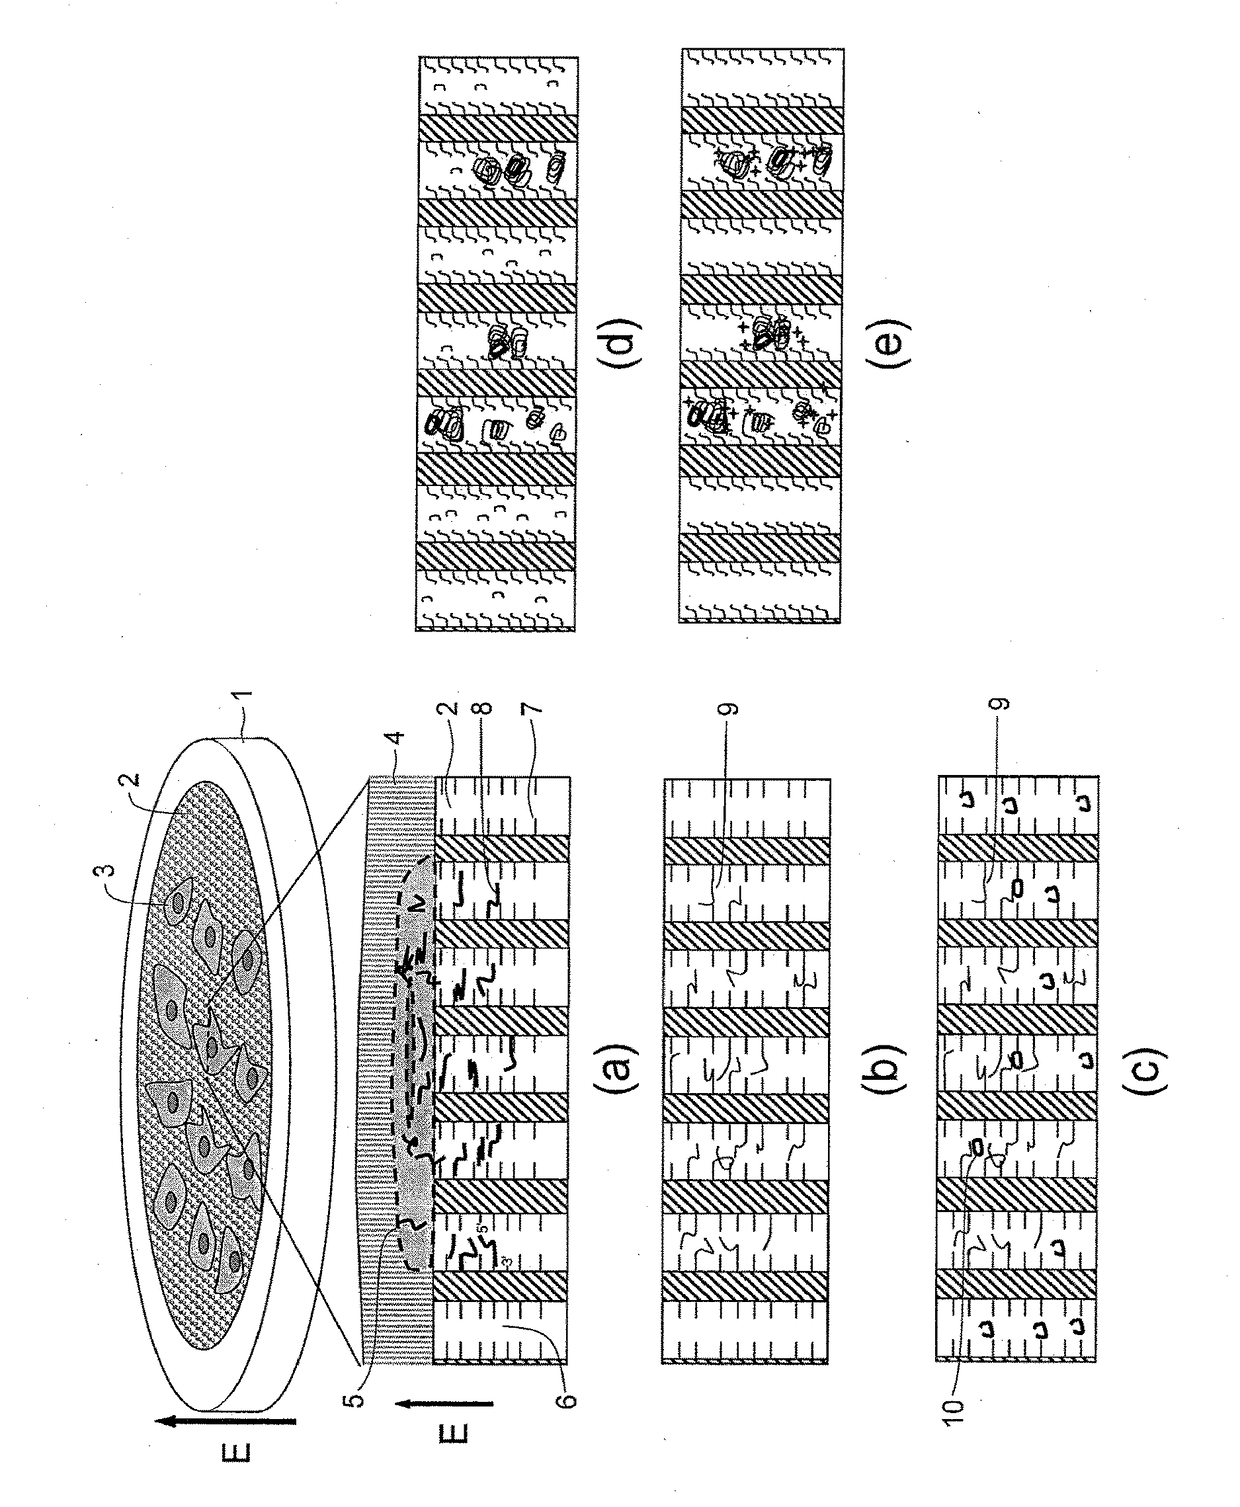 GENE EXPRESSION ANALYSIS METHOD USING TWO DIMENSIONAL cDNA LIBRARY